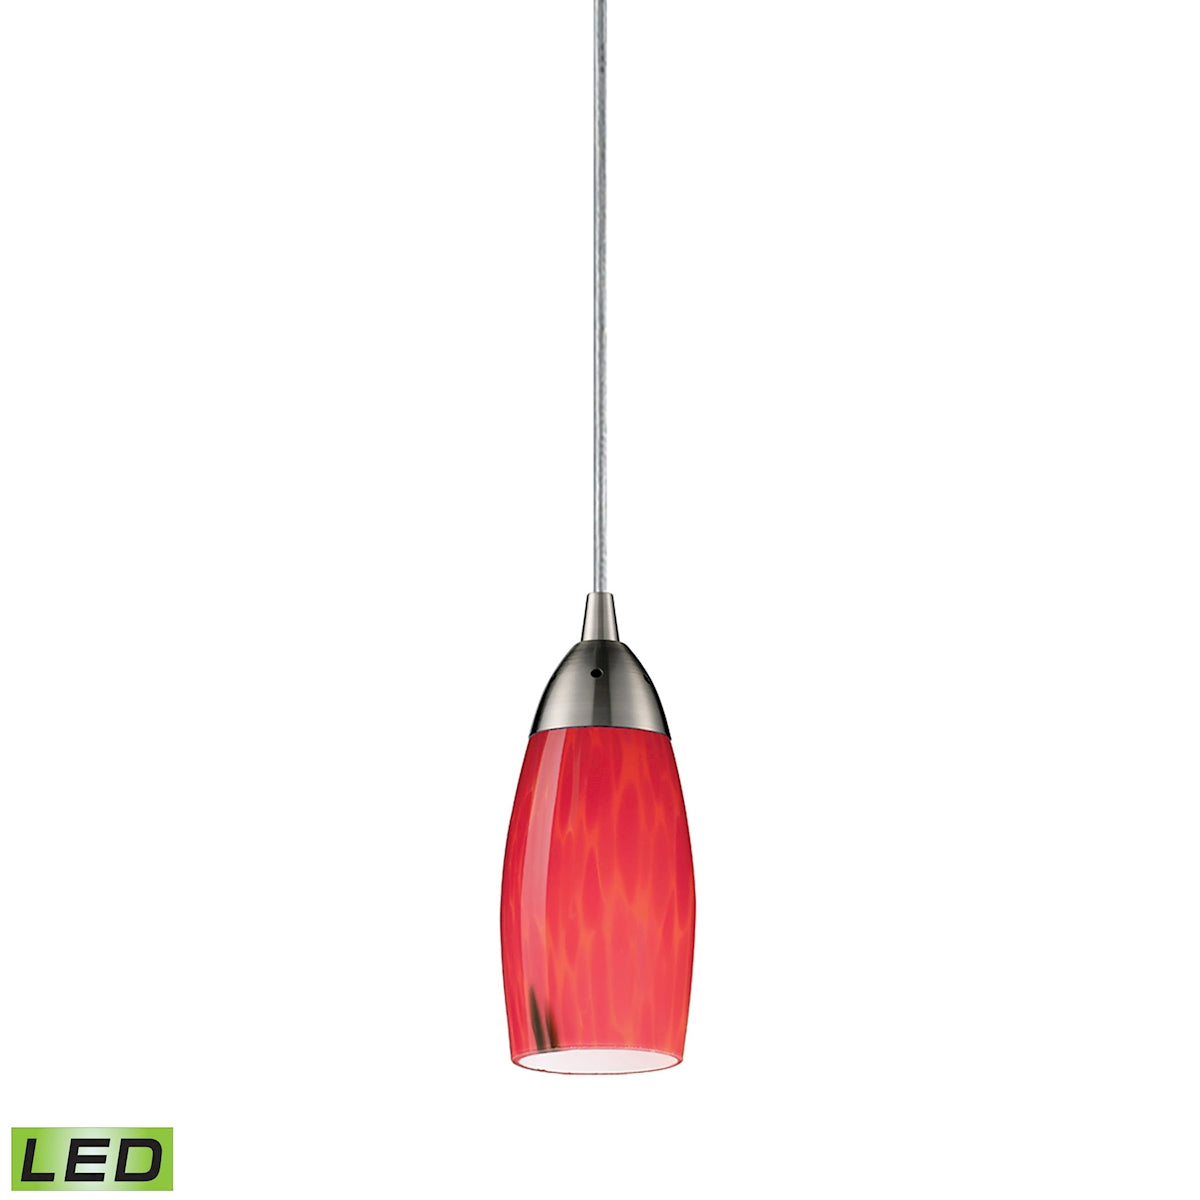 ELK Lighting 110-1FR-LED Milan 1-Light Mini Pendant in Satin Nickel with Fire Red Glass - Includes LED Bulb